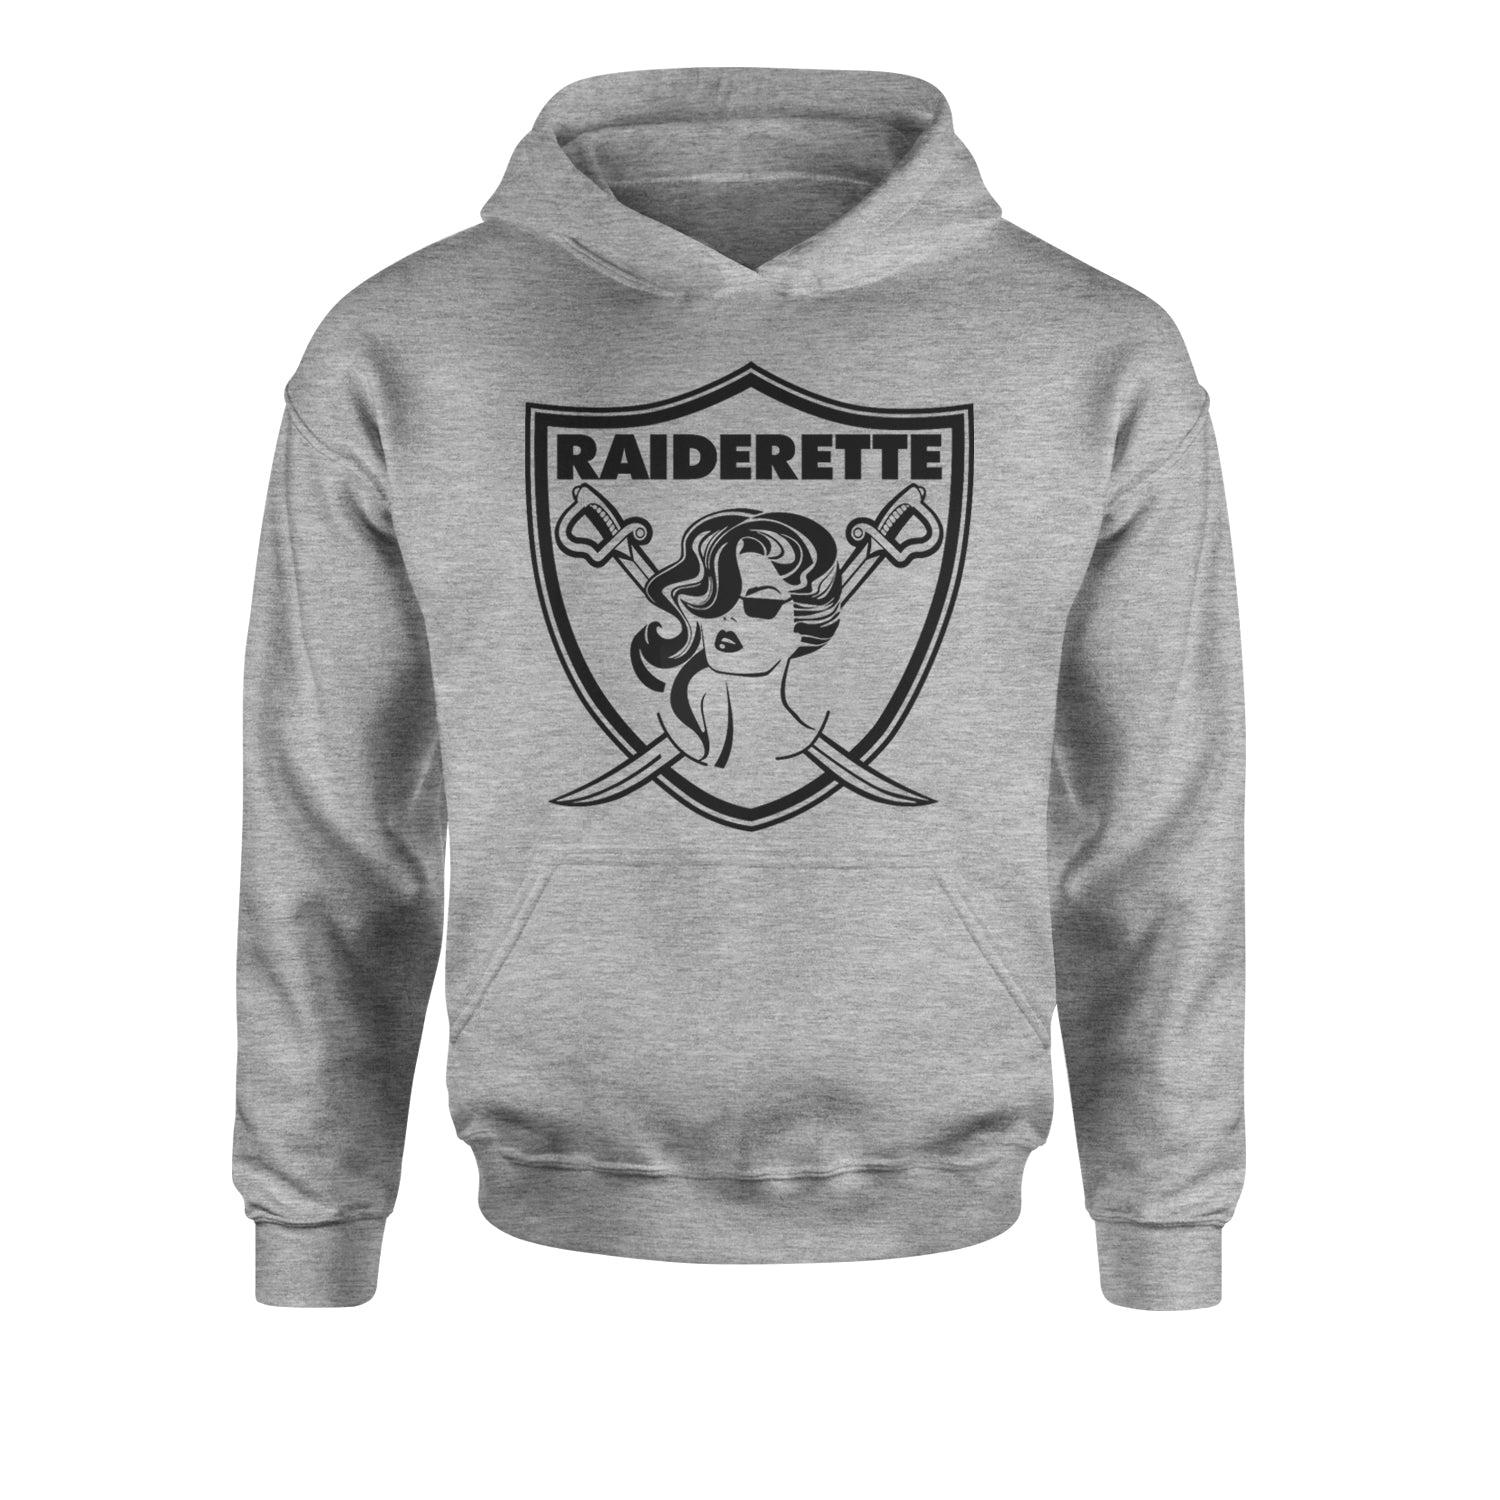 Raiderette Football Gameday Ready Youth-Sized Hoodie